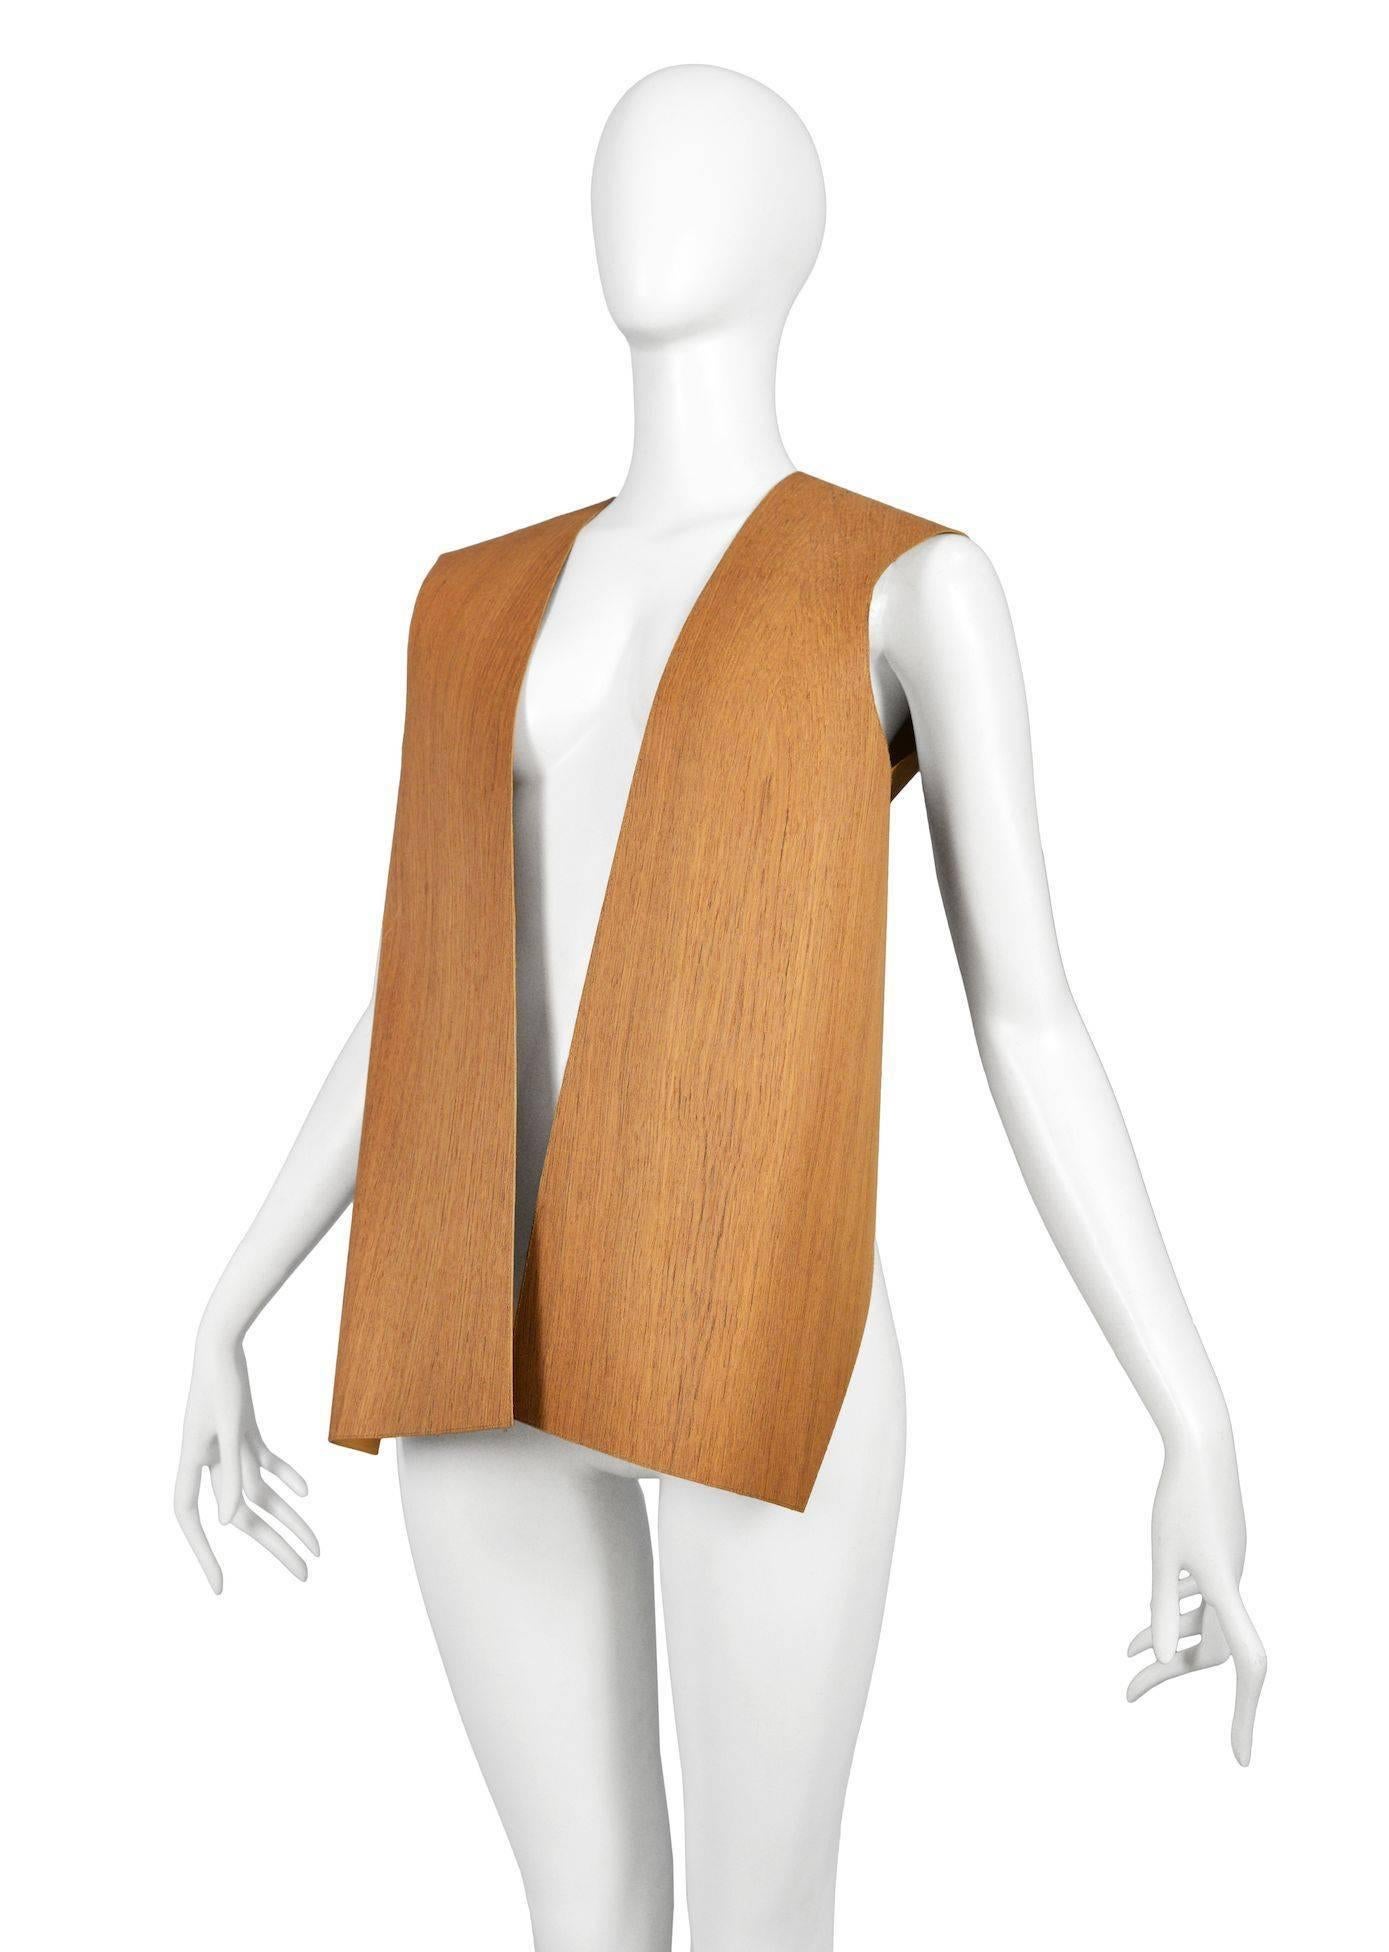 Maison Martin Margiela Artisanal Wood Vest 2011 In Excellent Condition For Sale In Los Angeles, CA